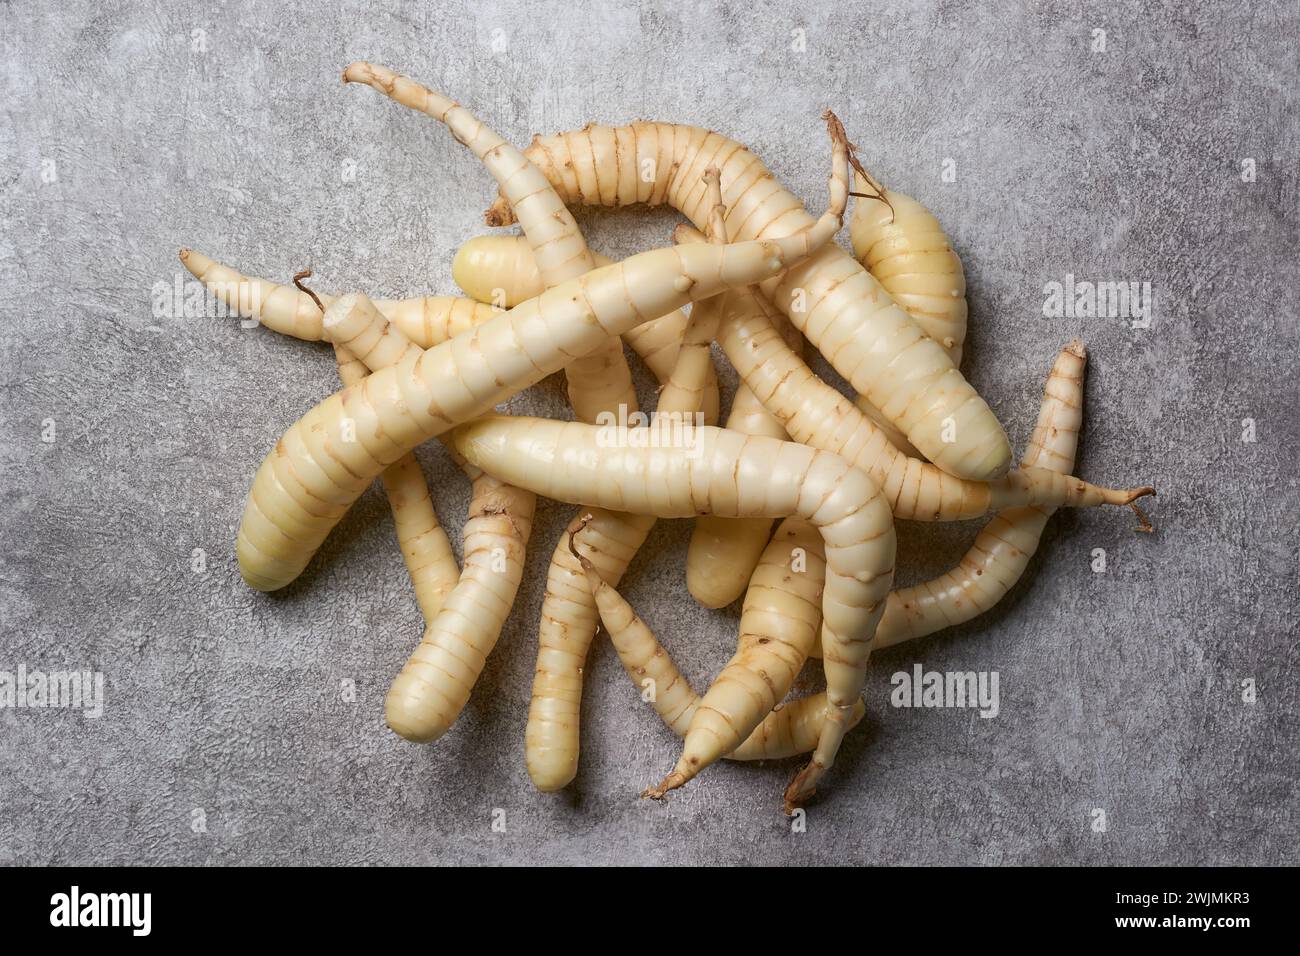 pile of organic arrowroot rhizomes, maranta arundinacea, tropical plant known for starchy rhizomes harvested for various culinary purposes, used as gl Stock Photo